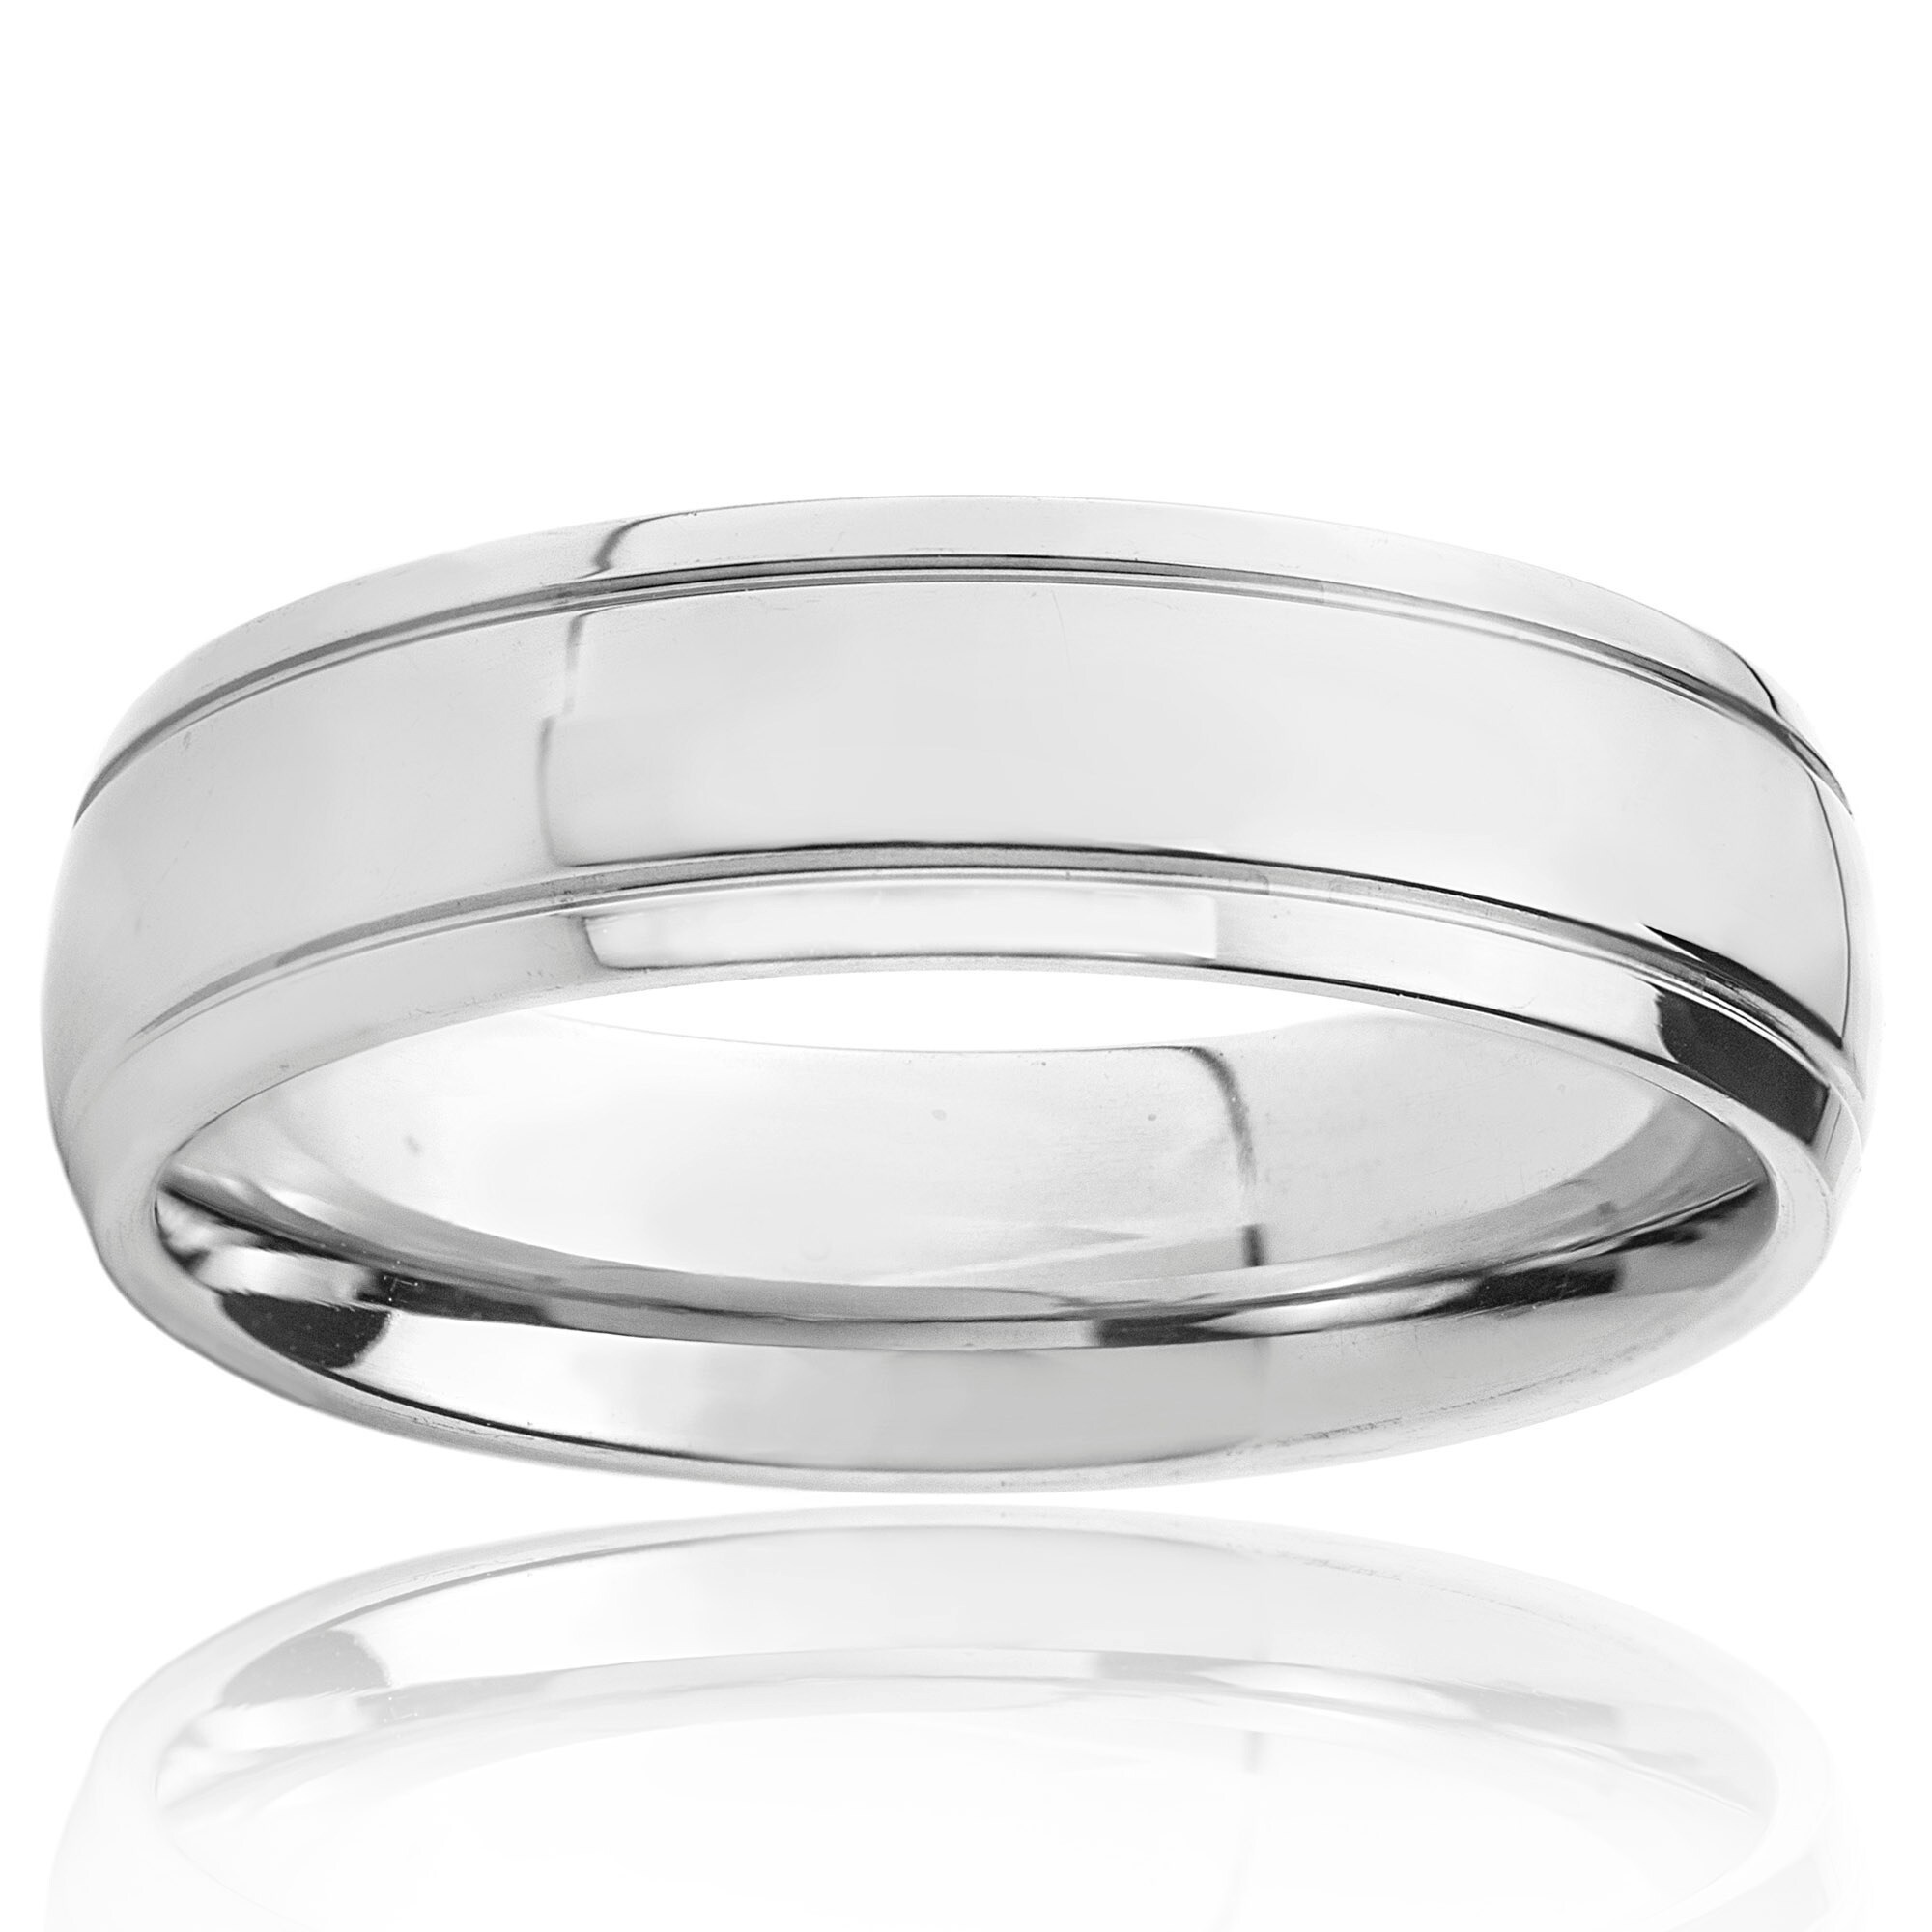 Shop Stainless Steel Men's High Polish Wedding Band - White - On Sale ...